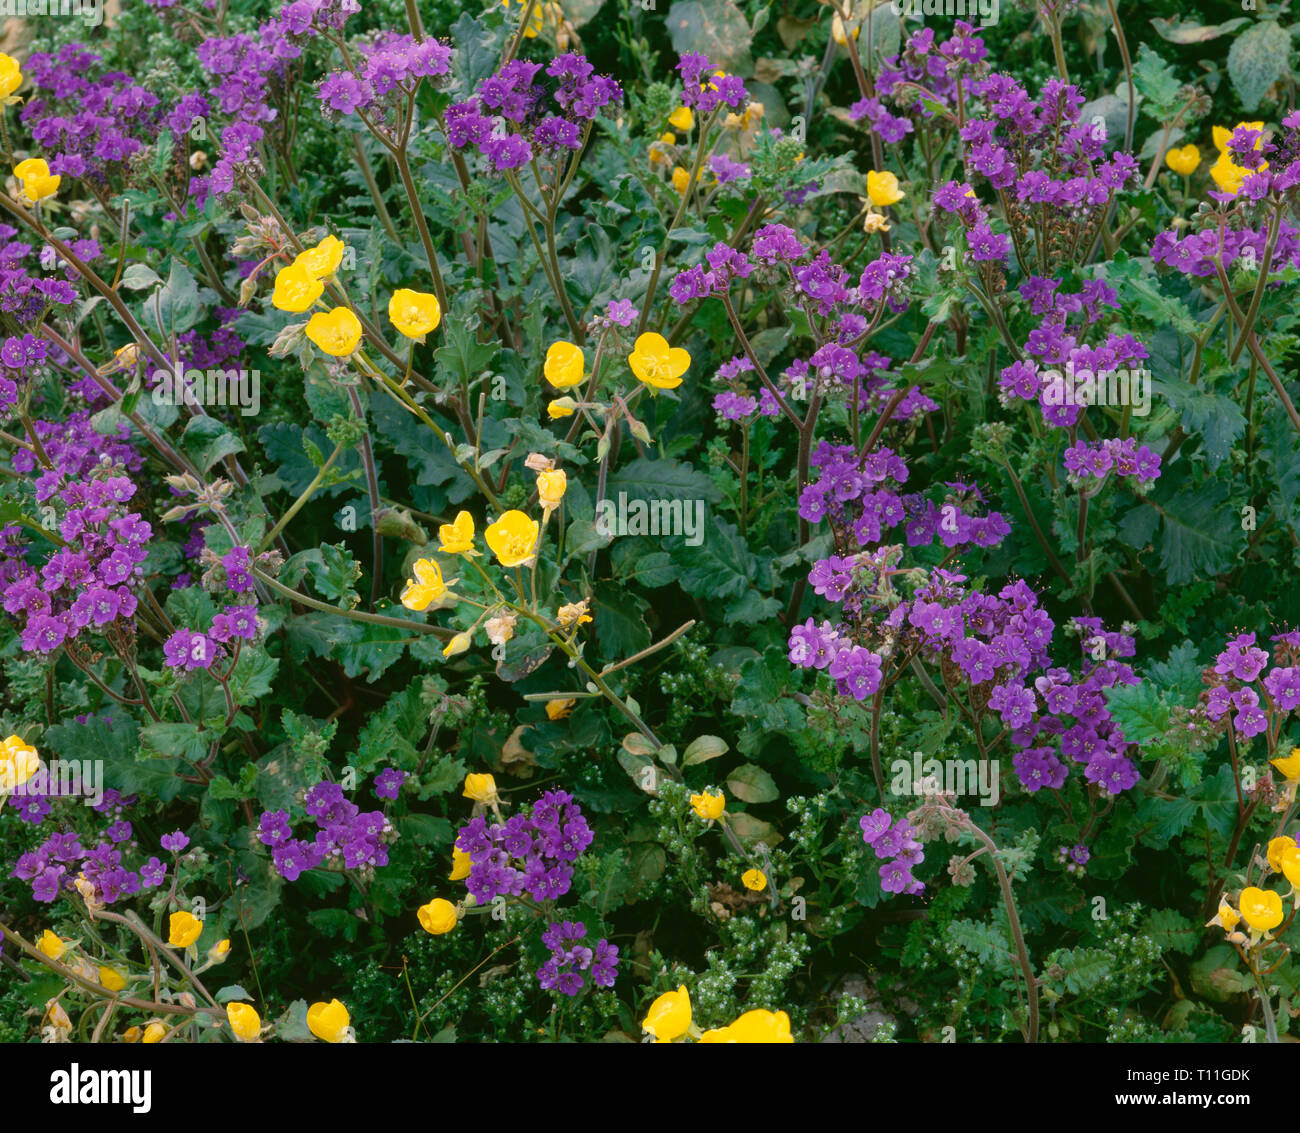 USA, California, Death Valley National Park, Notch-leaf phacelia and golden evening primrose in bloom near Furnace Creek. Stock Photo